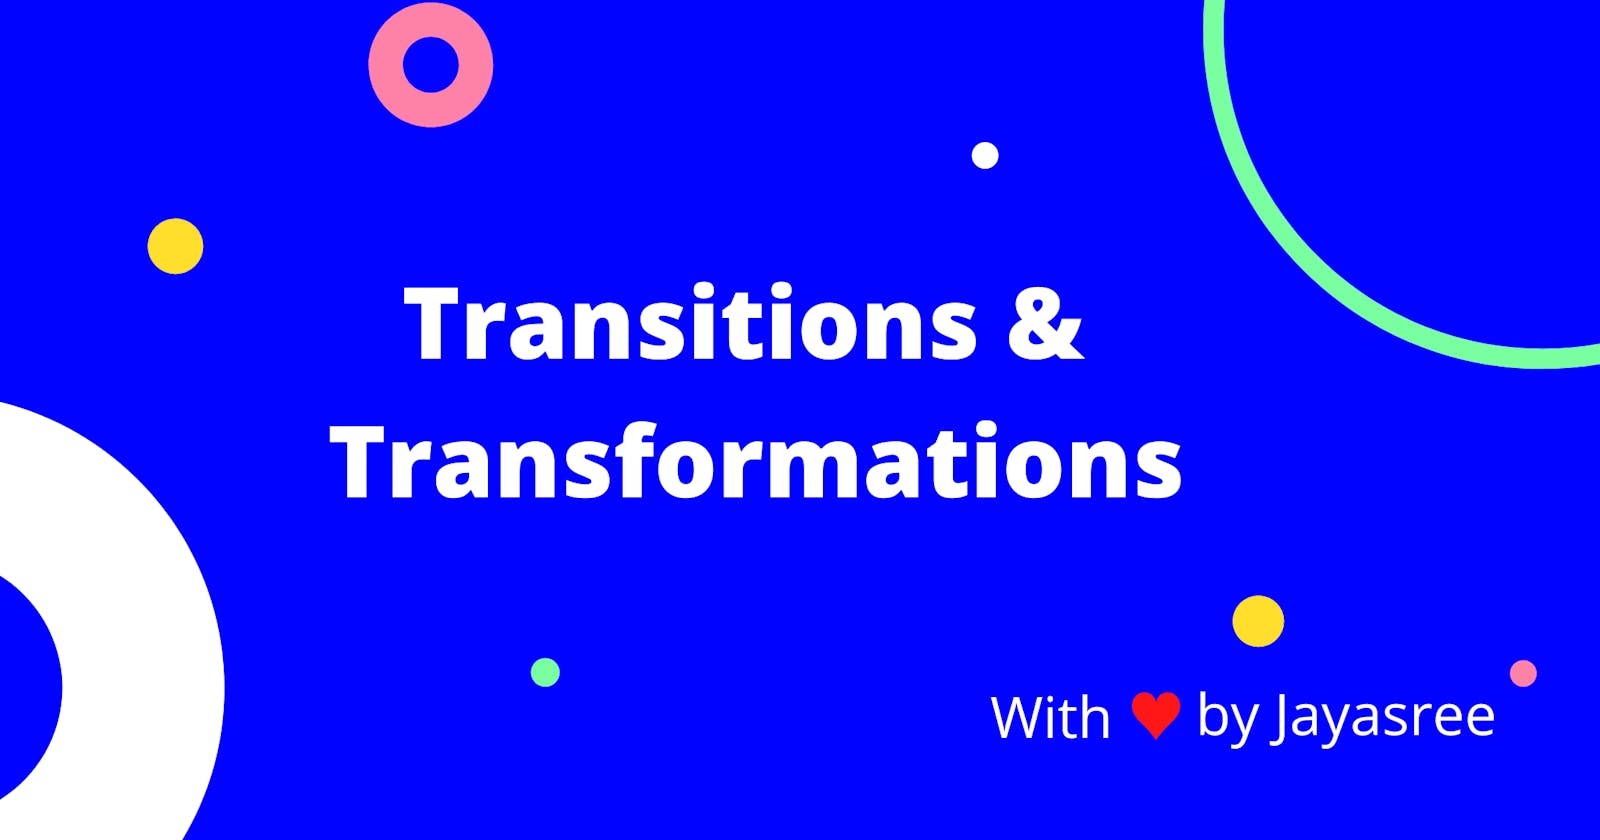 Level up your transition and transformations game